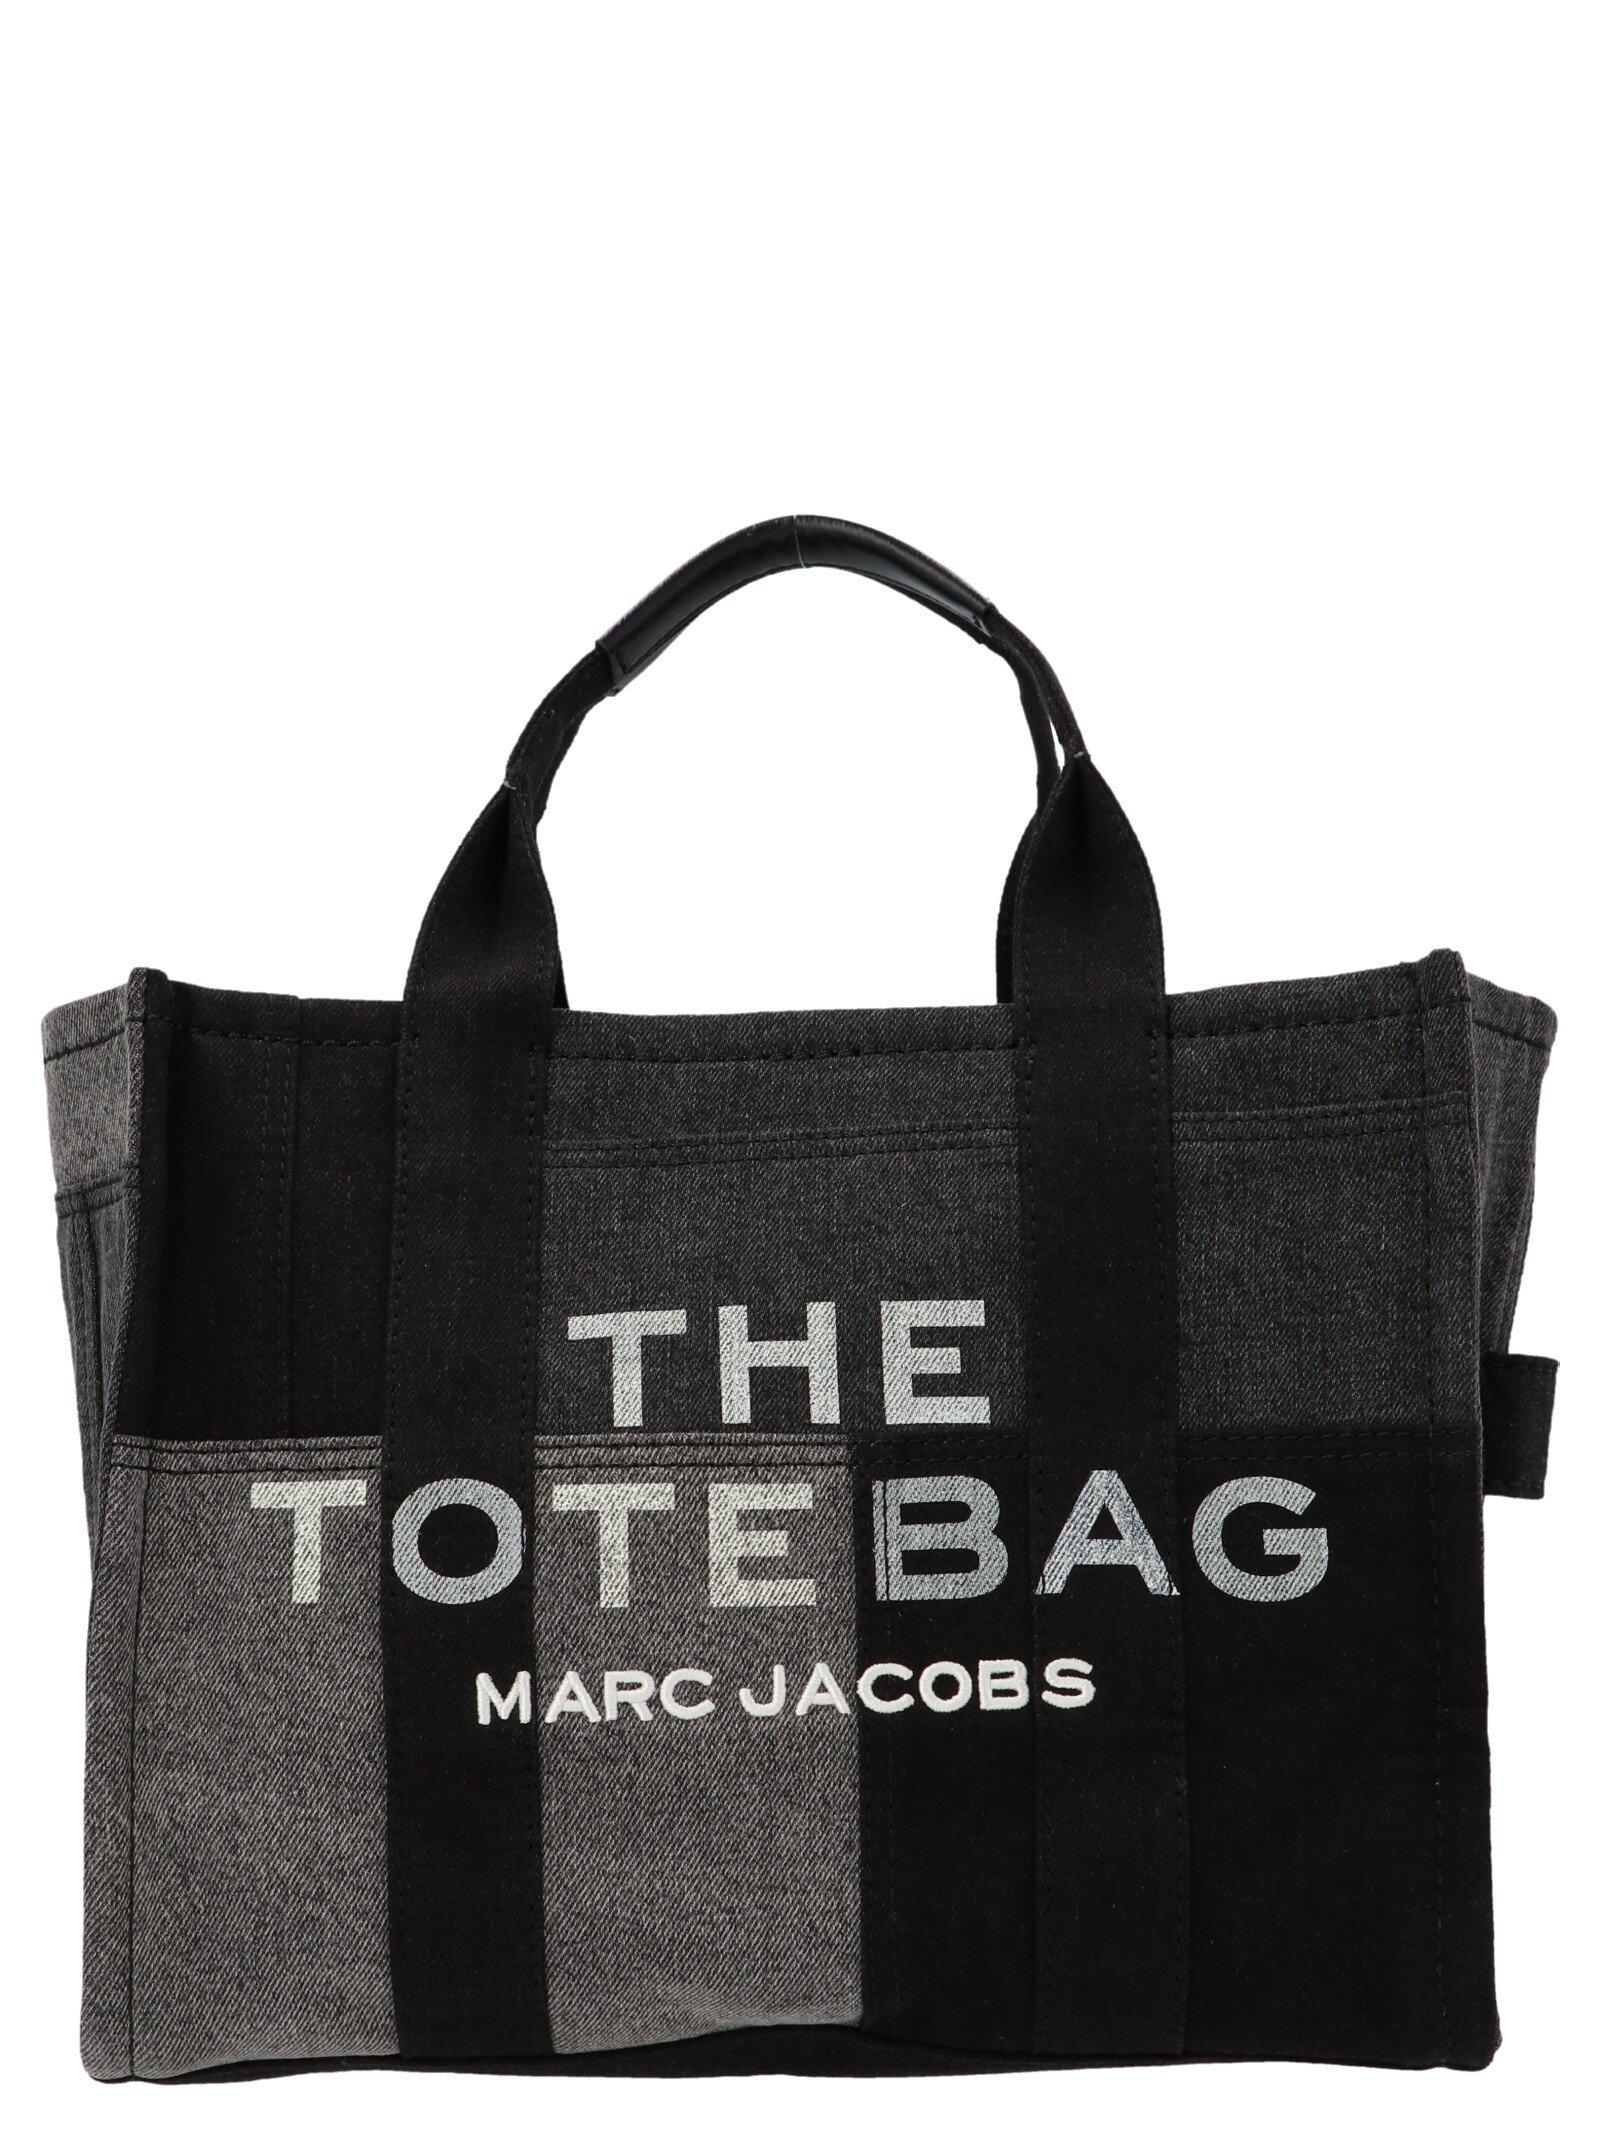 Marc Jacobs The Denim Small Tote Bag in Black | Lyst